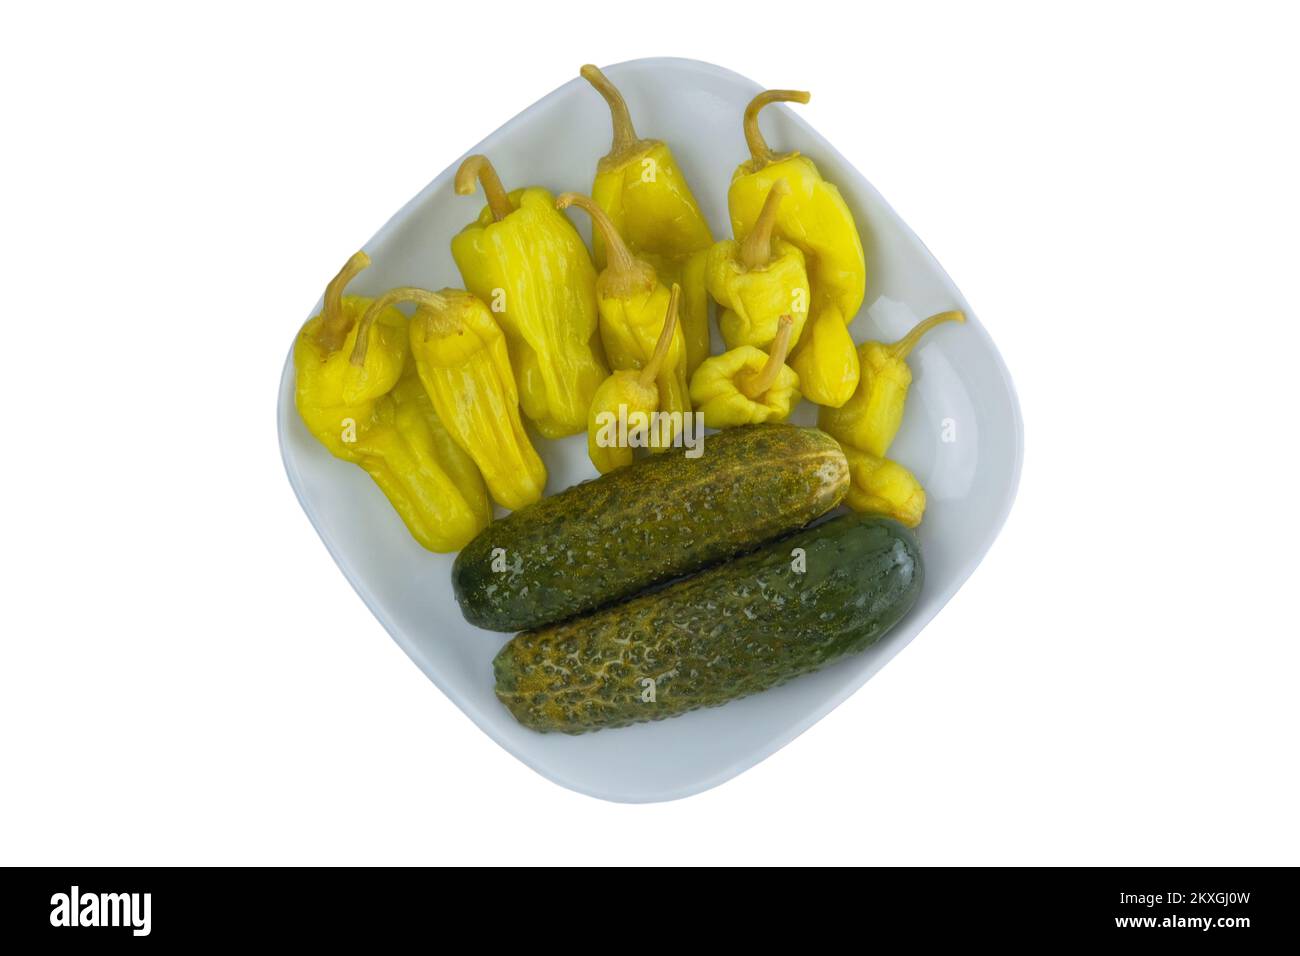 Pickled cucumbers and peppers on a plate isolated on a white background. Fermented vegetables home cooking. Stock Photo